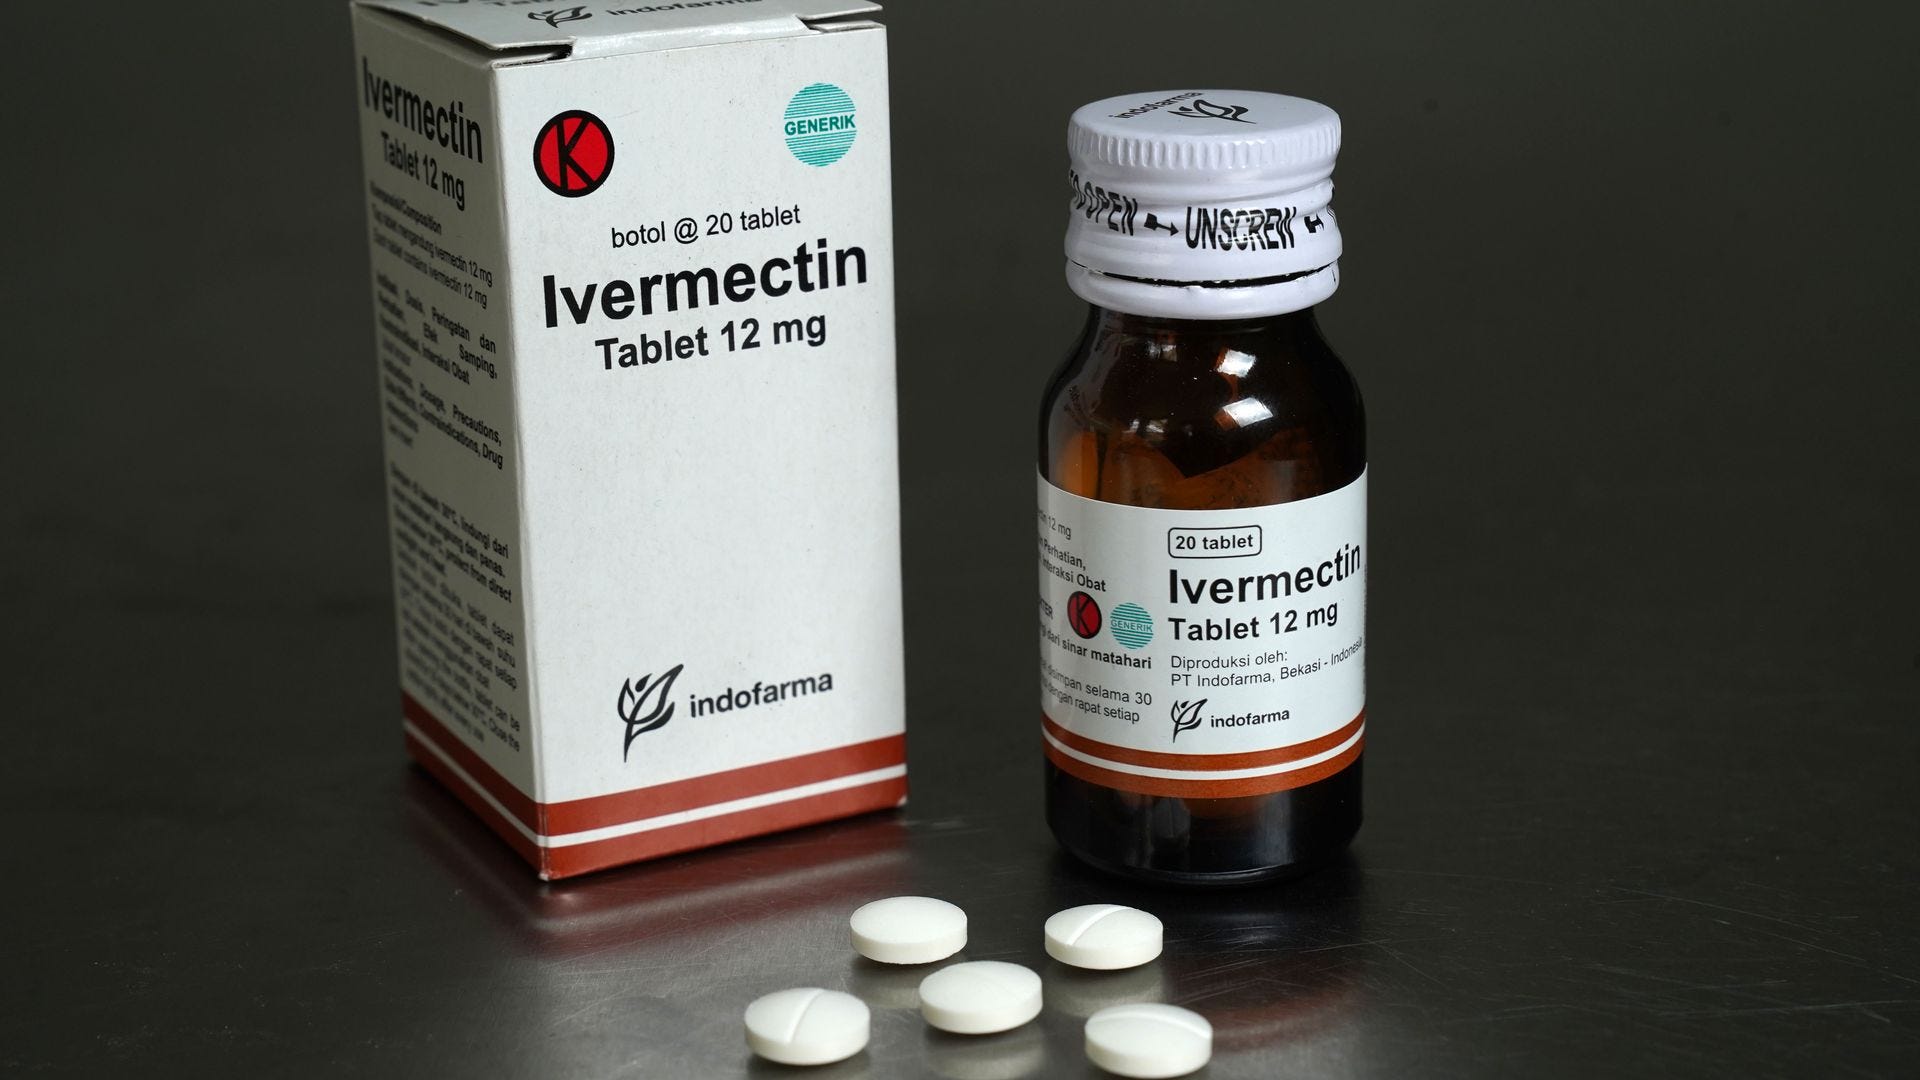 Study: Ivermectin does not prevent COVID-19 hospitalization